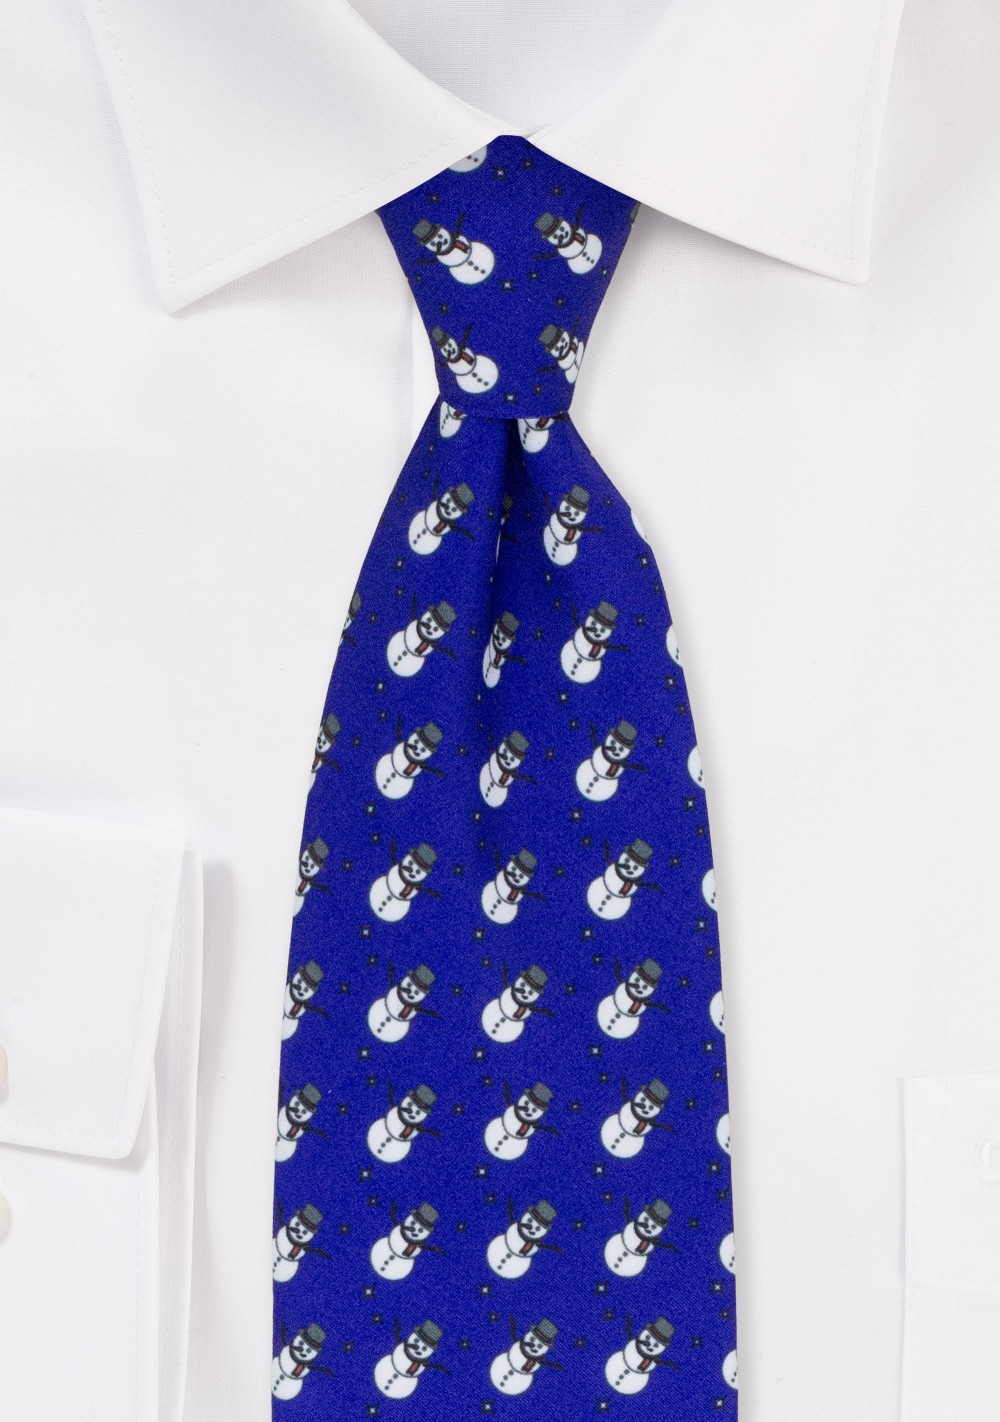 Snowman Print Holiday Tie in Navy Blue